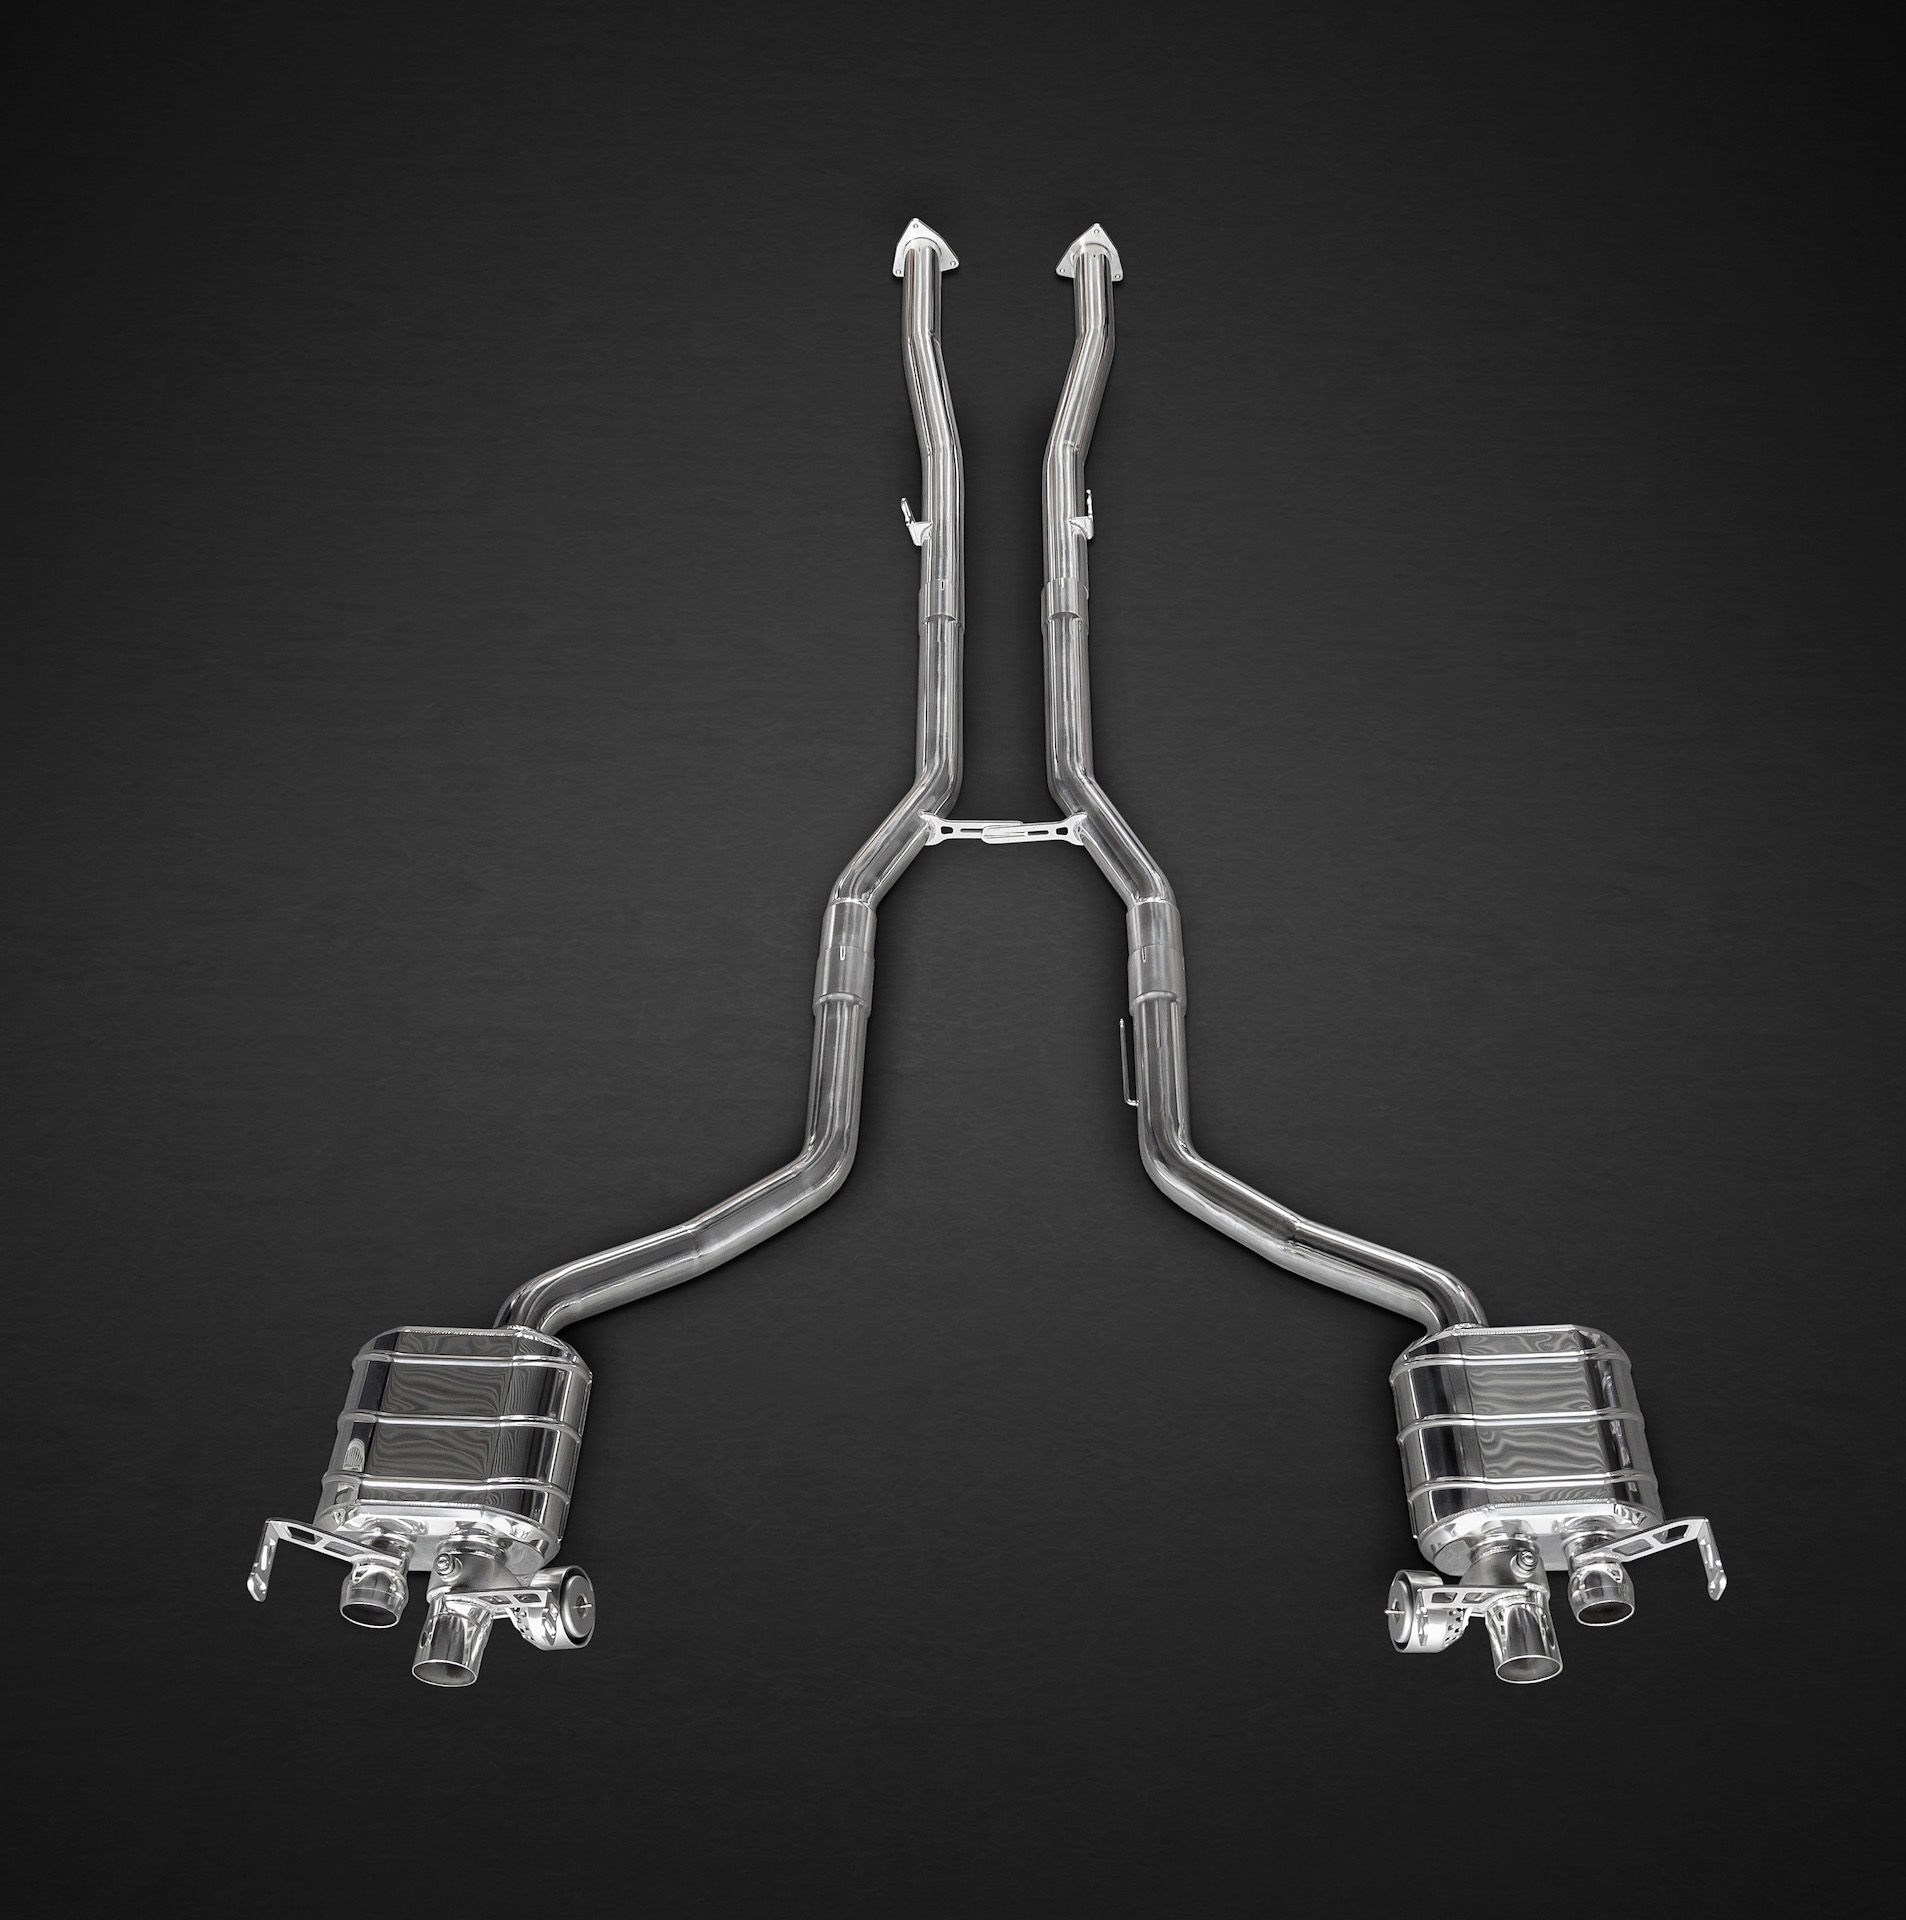 Capristo Bentley Continental GT V8 (S) Valved Exhaust System (No Remote)